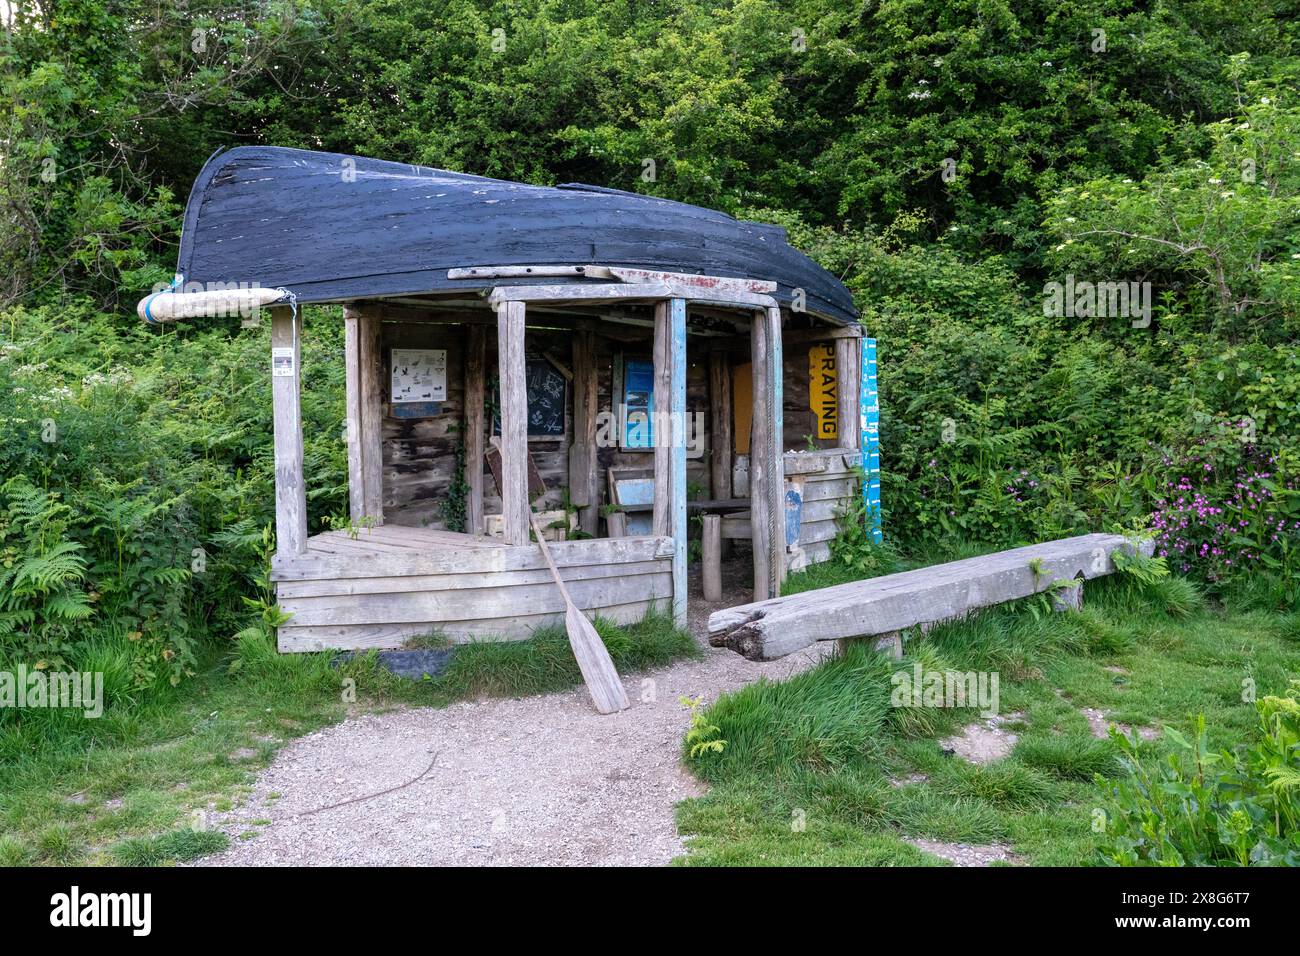 A hut for shelter with an upturned boat as a roof in the grounds of Trelissick Garden, Feock, Cornwall Stock Photo